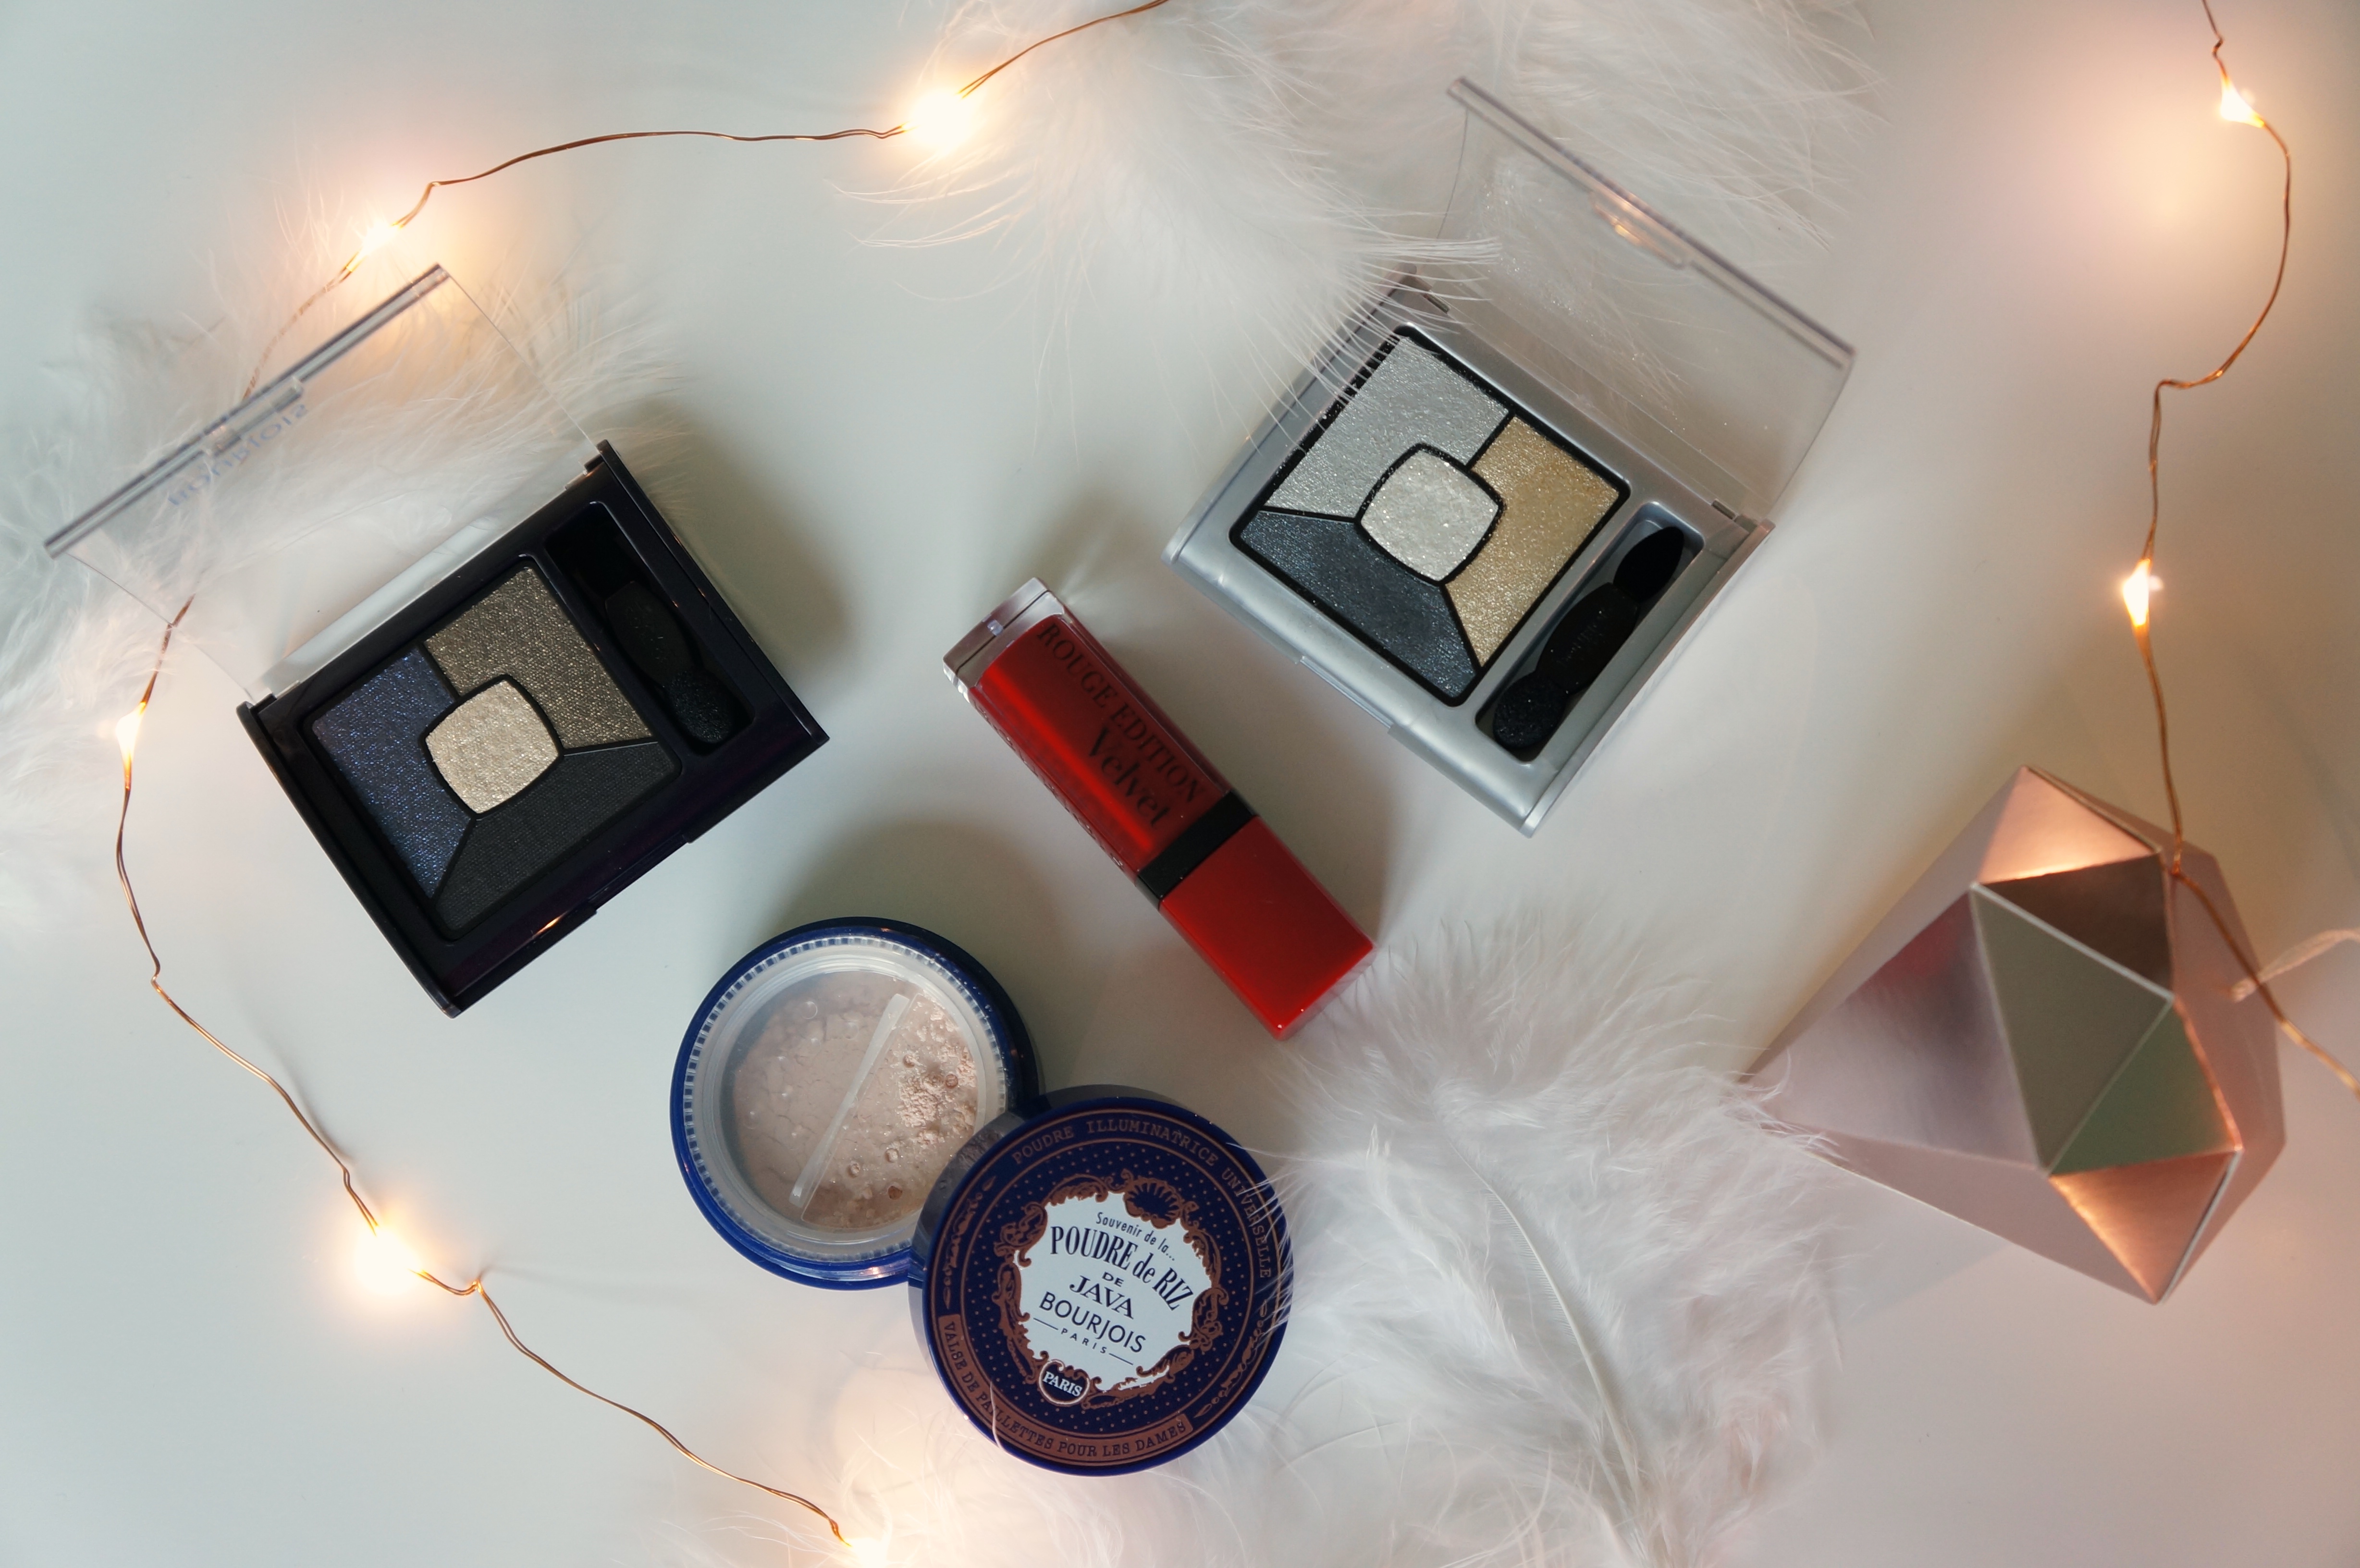 Bourjois Holiday Make-Up/ Pic by 1FDLE.